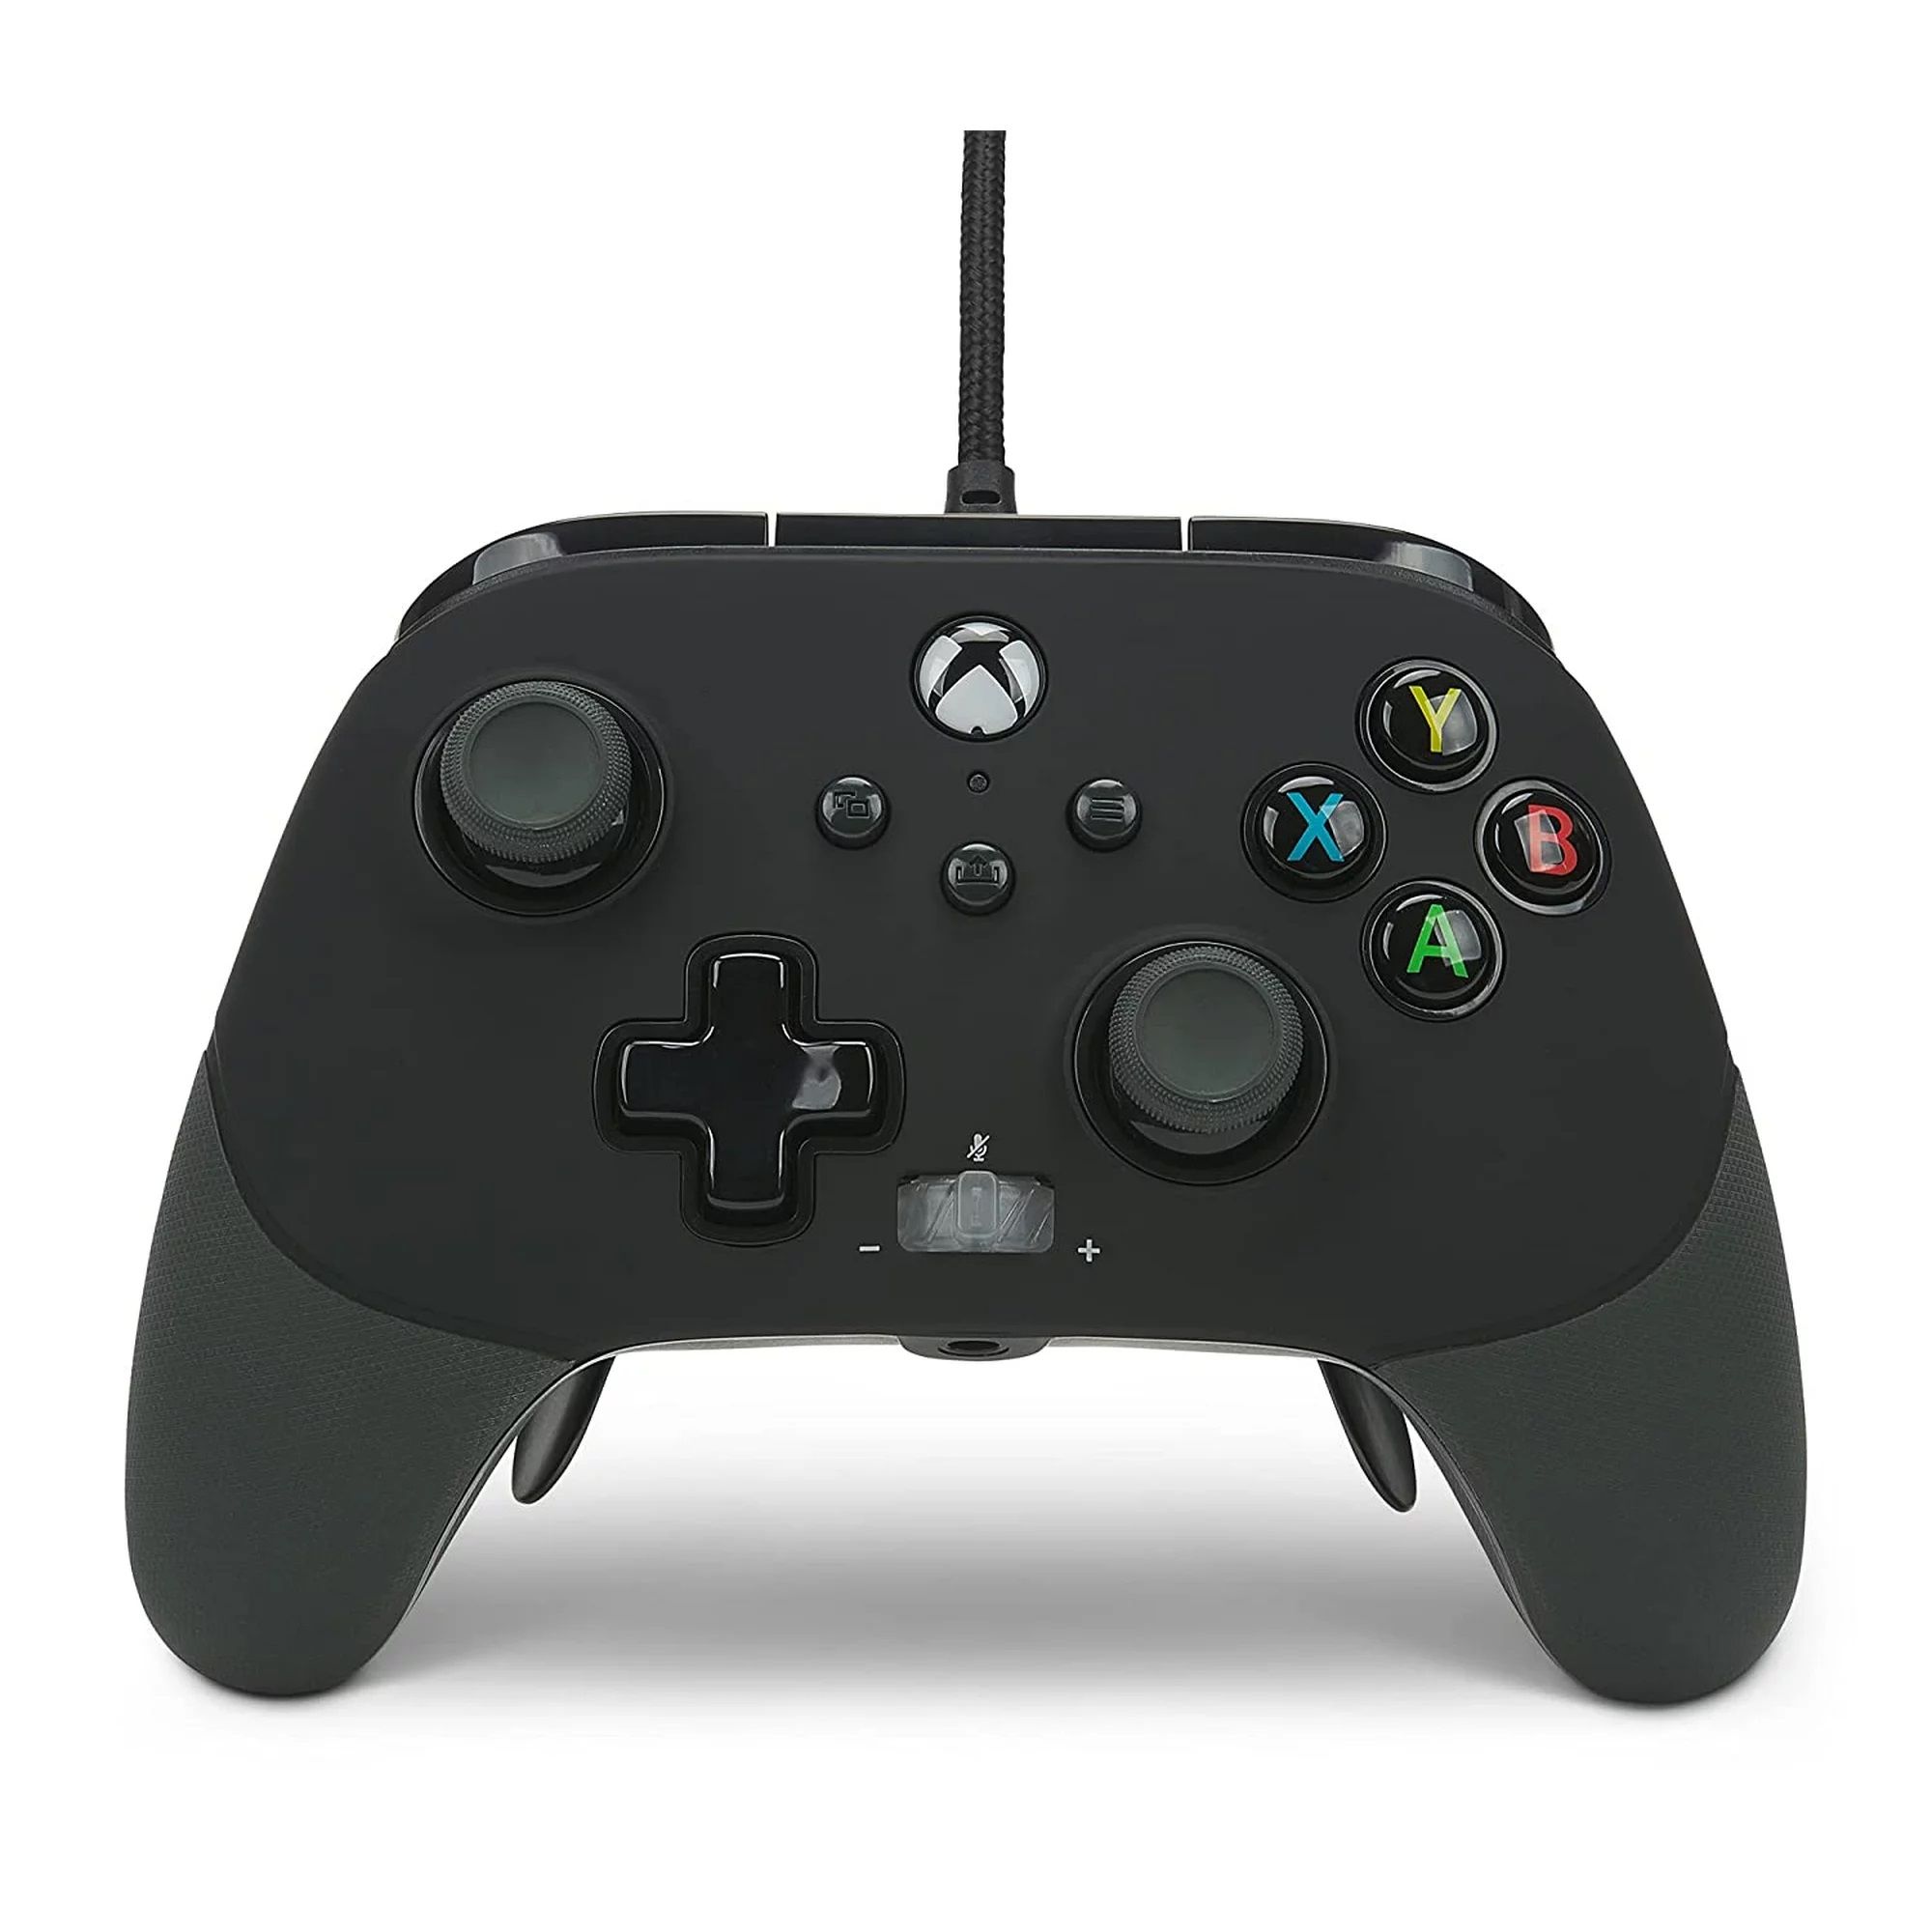 PowerA FUSION Pro 2 Wired Controller